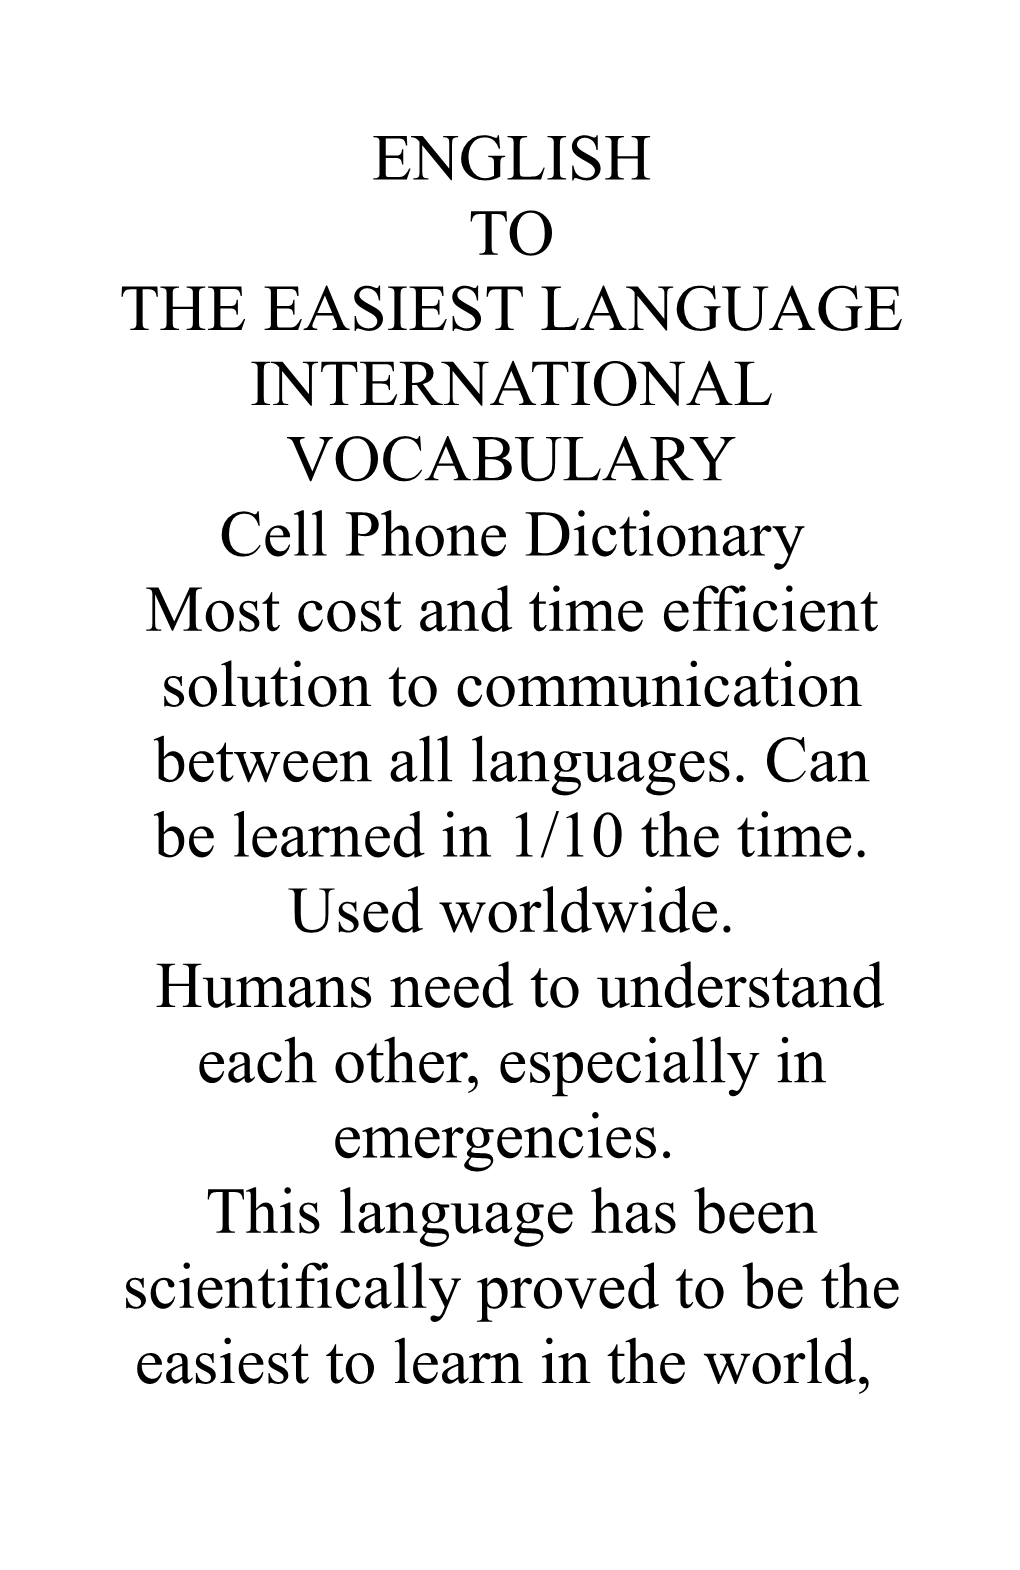 ENGLISH to the EASIEST LANGUAGE INTERNATIONAL VOCABULARY Cell Phone Dictionary Most Cost and Time Efficient Solution to Communication Between All Languages